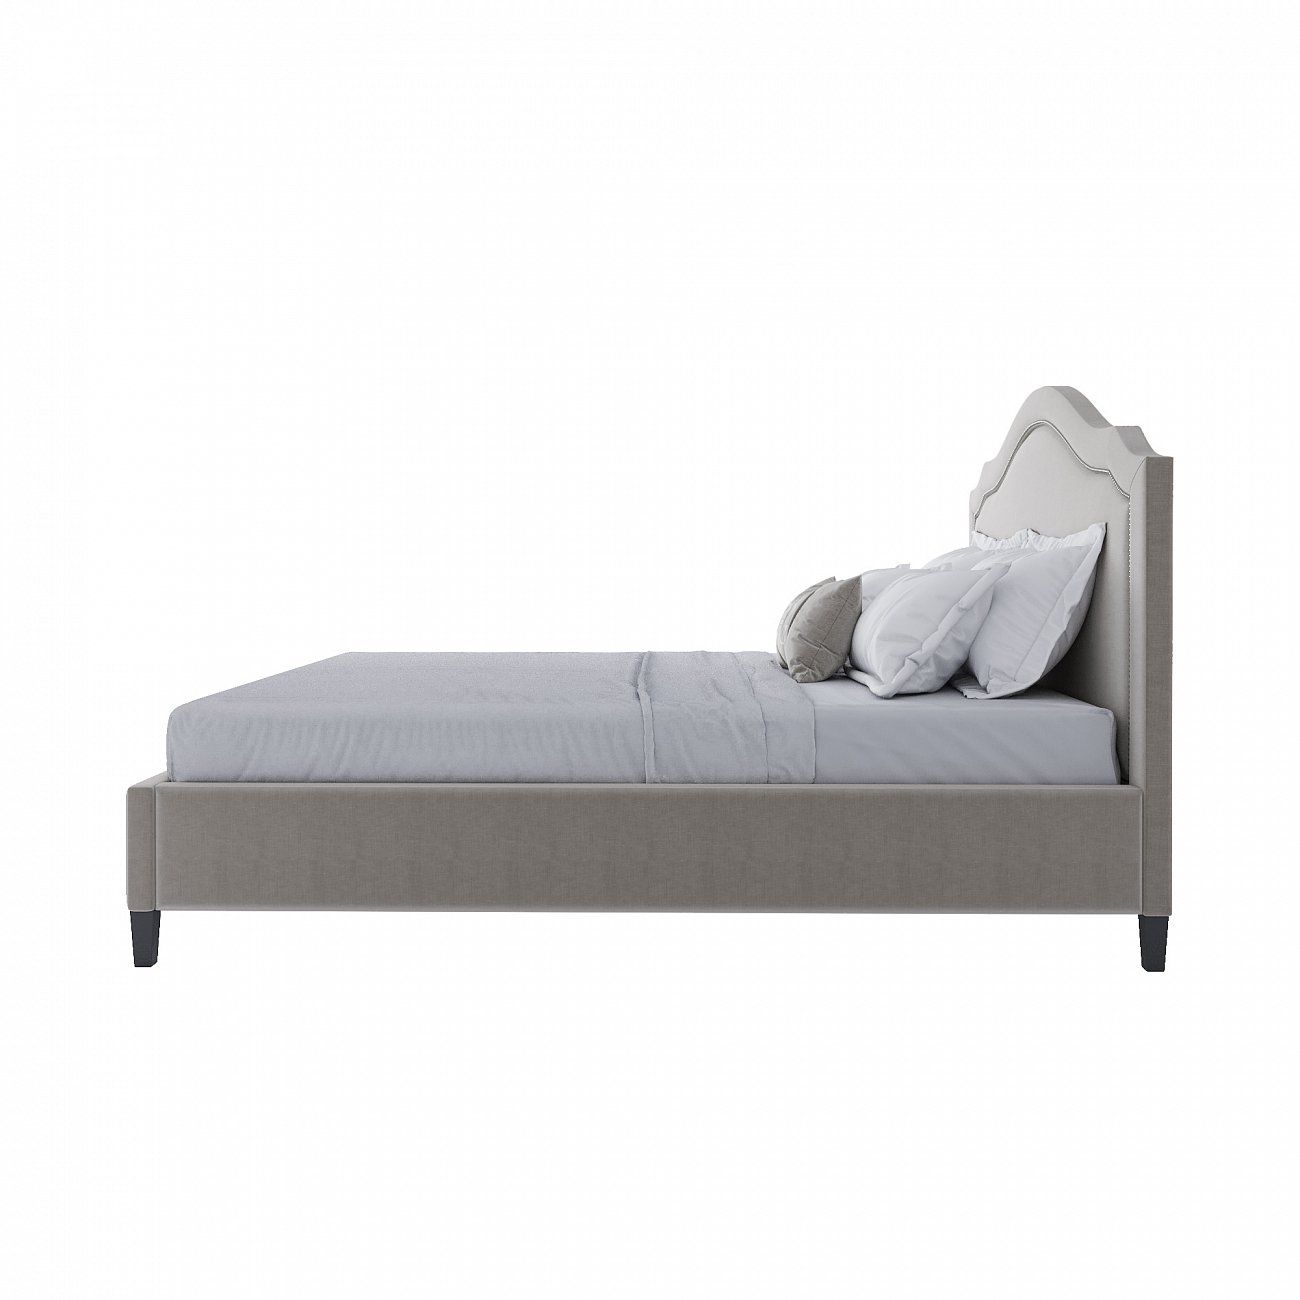 Cassis Upholstered double Bed 160x200 beige